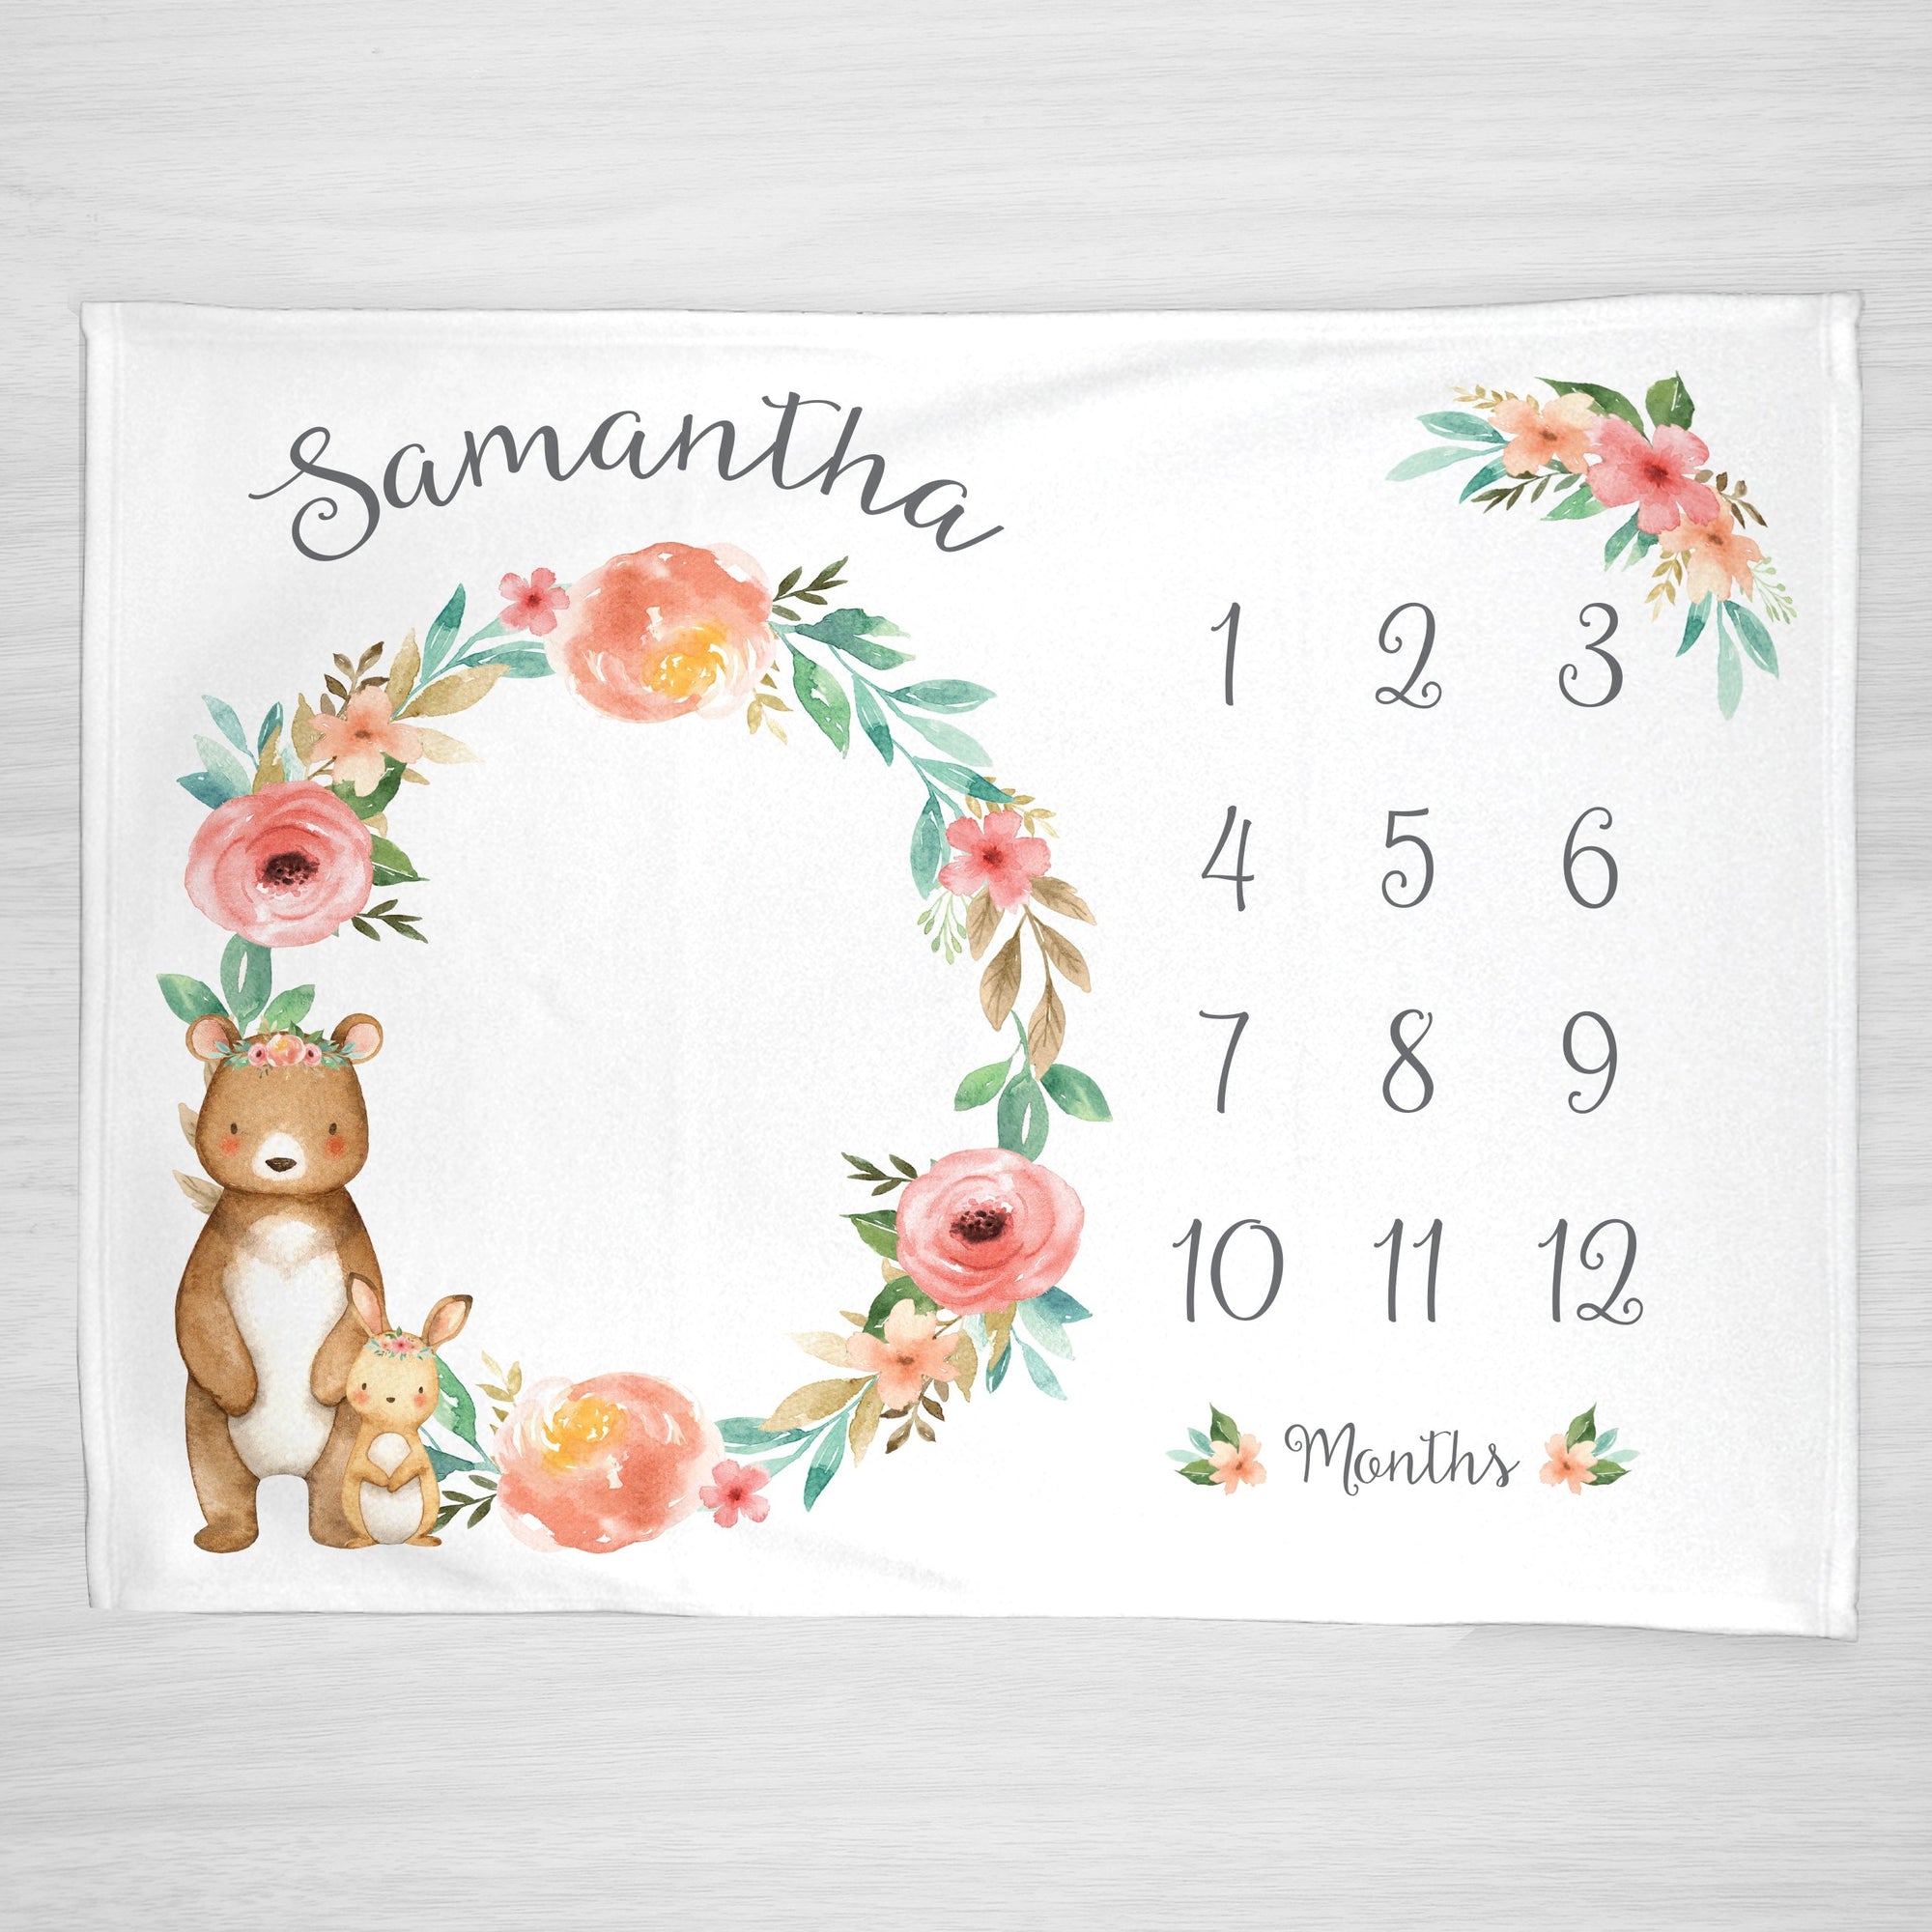 Bear Baby Milestone Blanket, Monthly Growth Tracker, Personalized Baby Blanket, Custom Blanket, Baby Shower Gift, New Baby Gift, Baby Girl, floral flowers